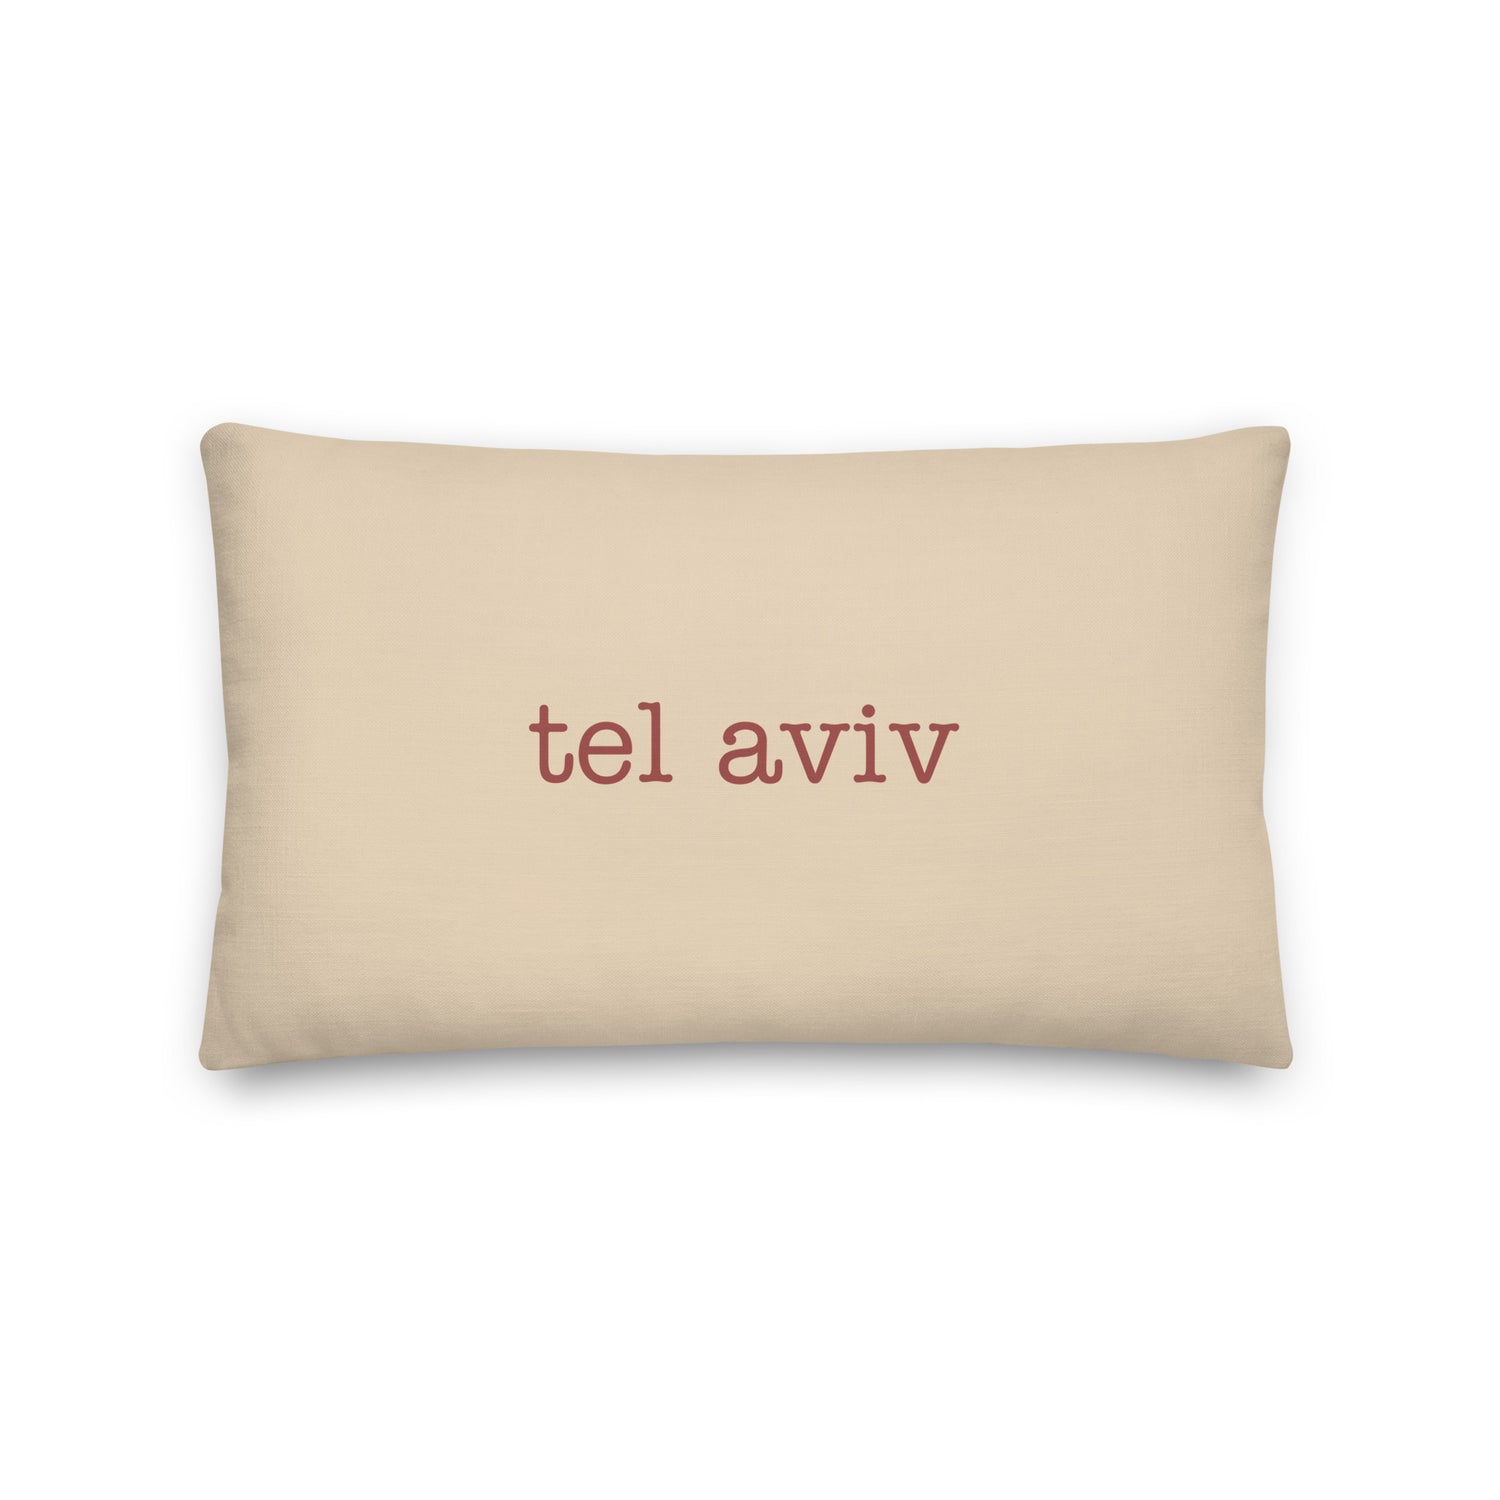 Tel Aviv Israel Pillows and Blankets • TLV Airport Code